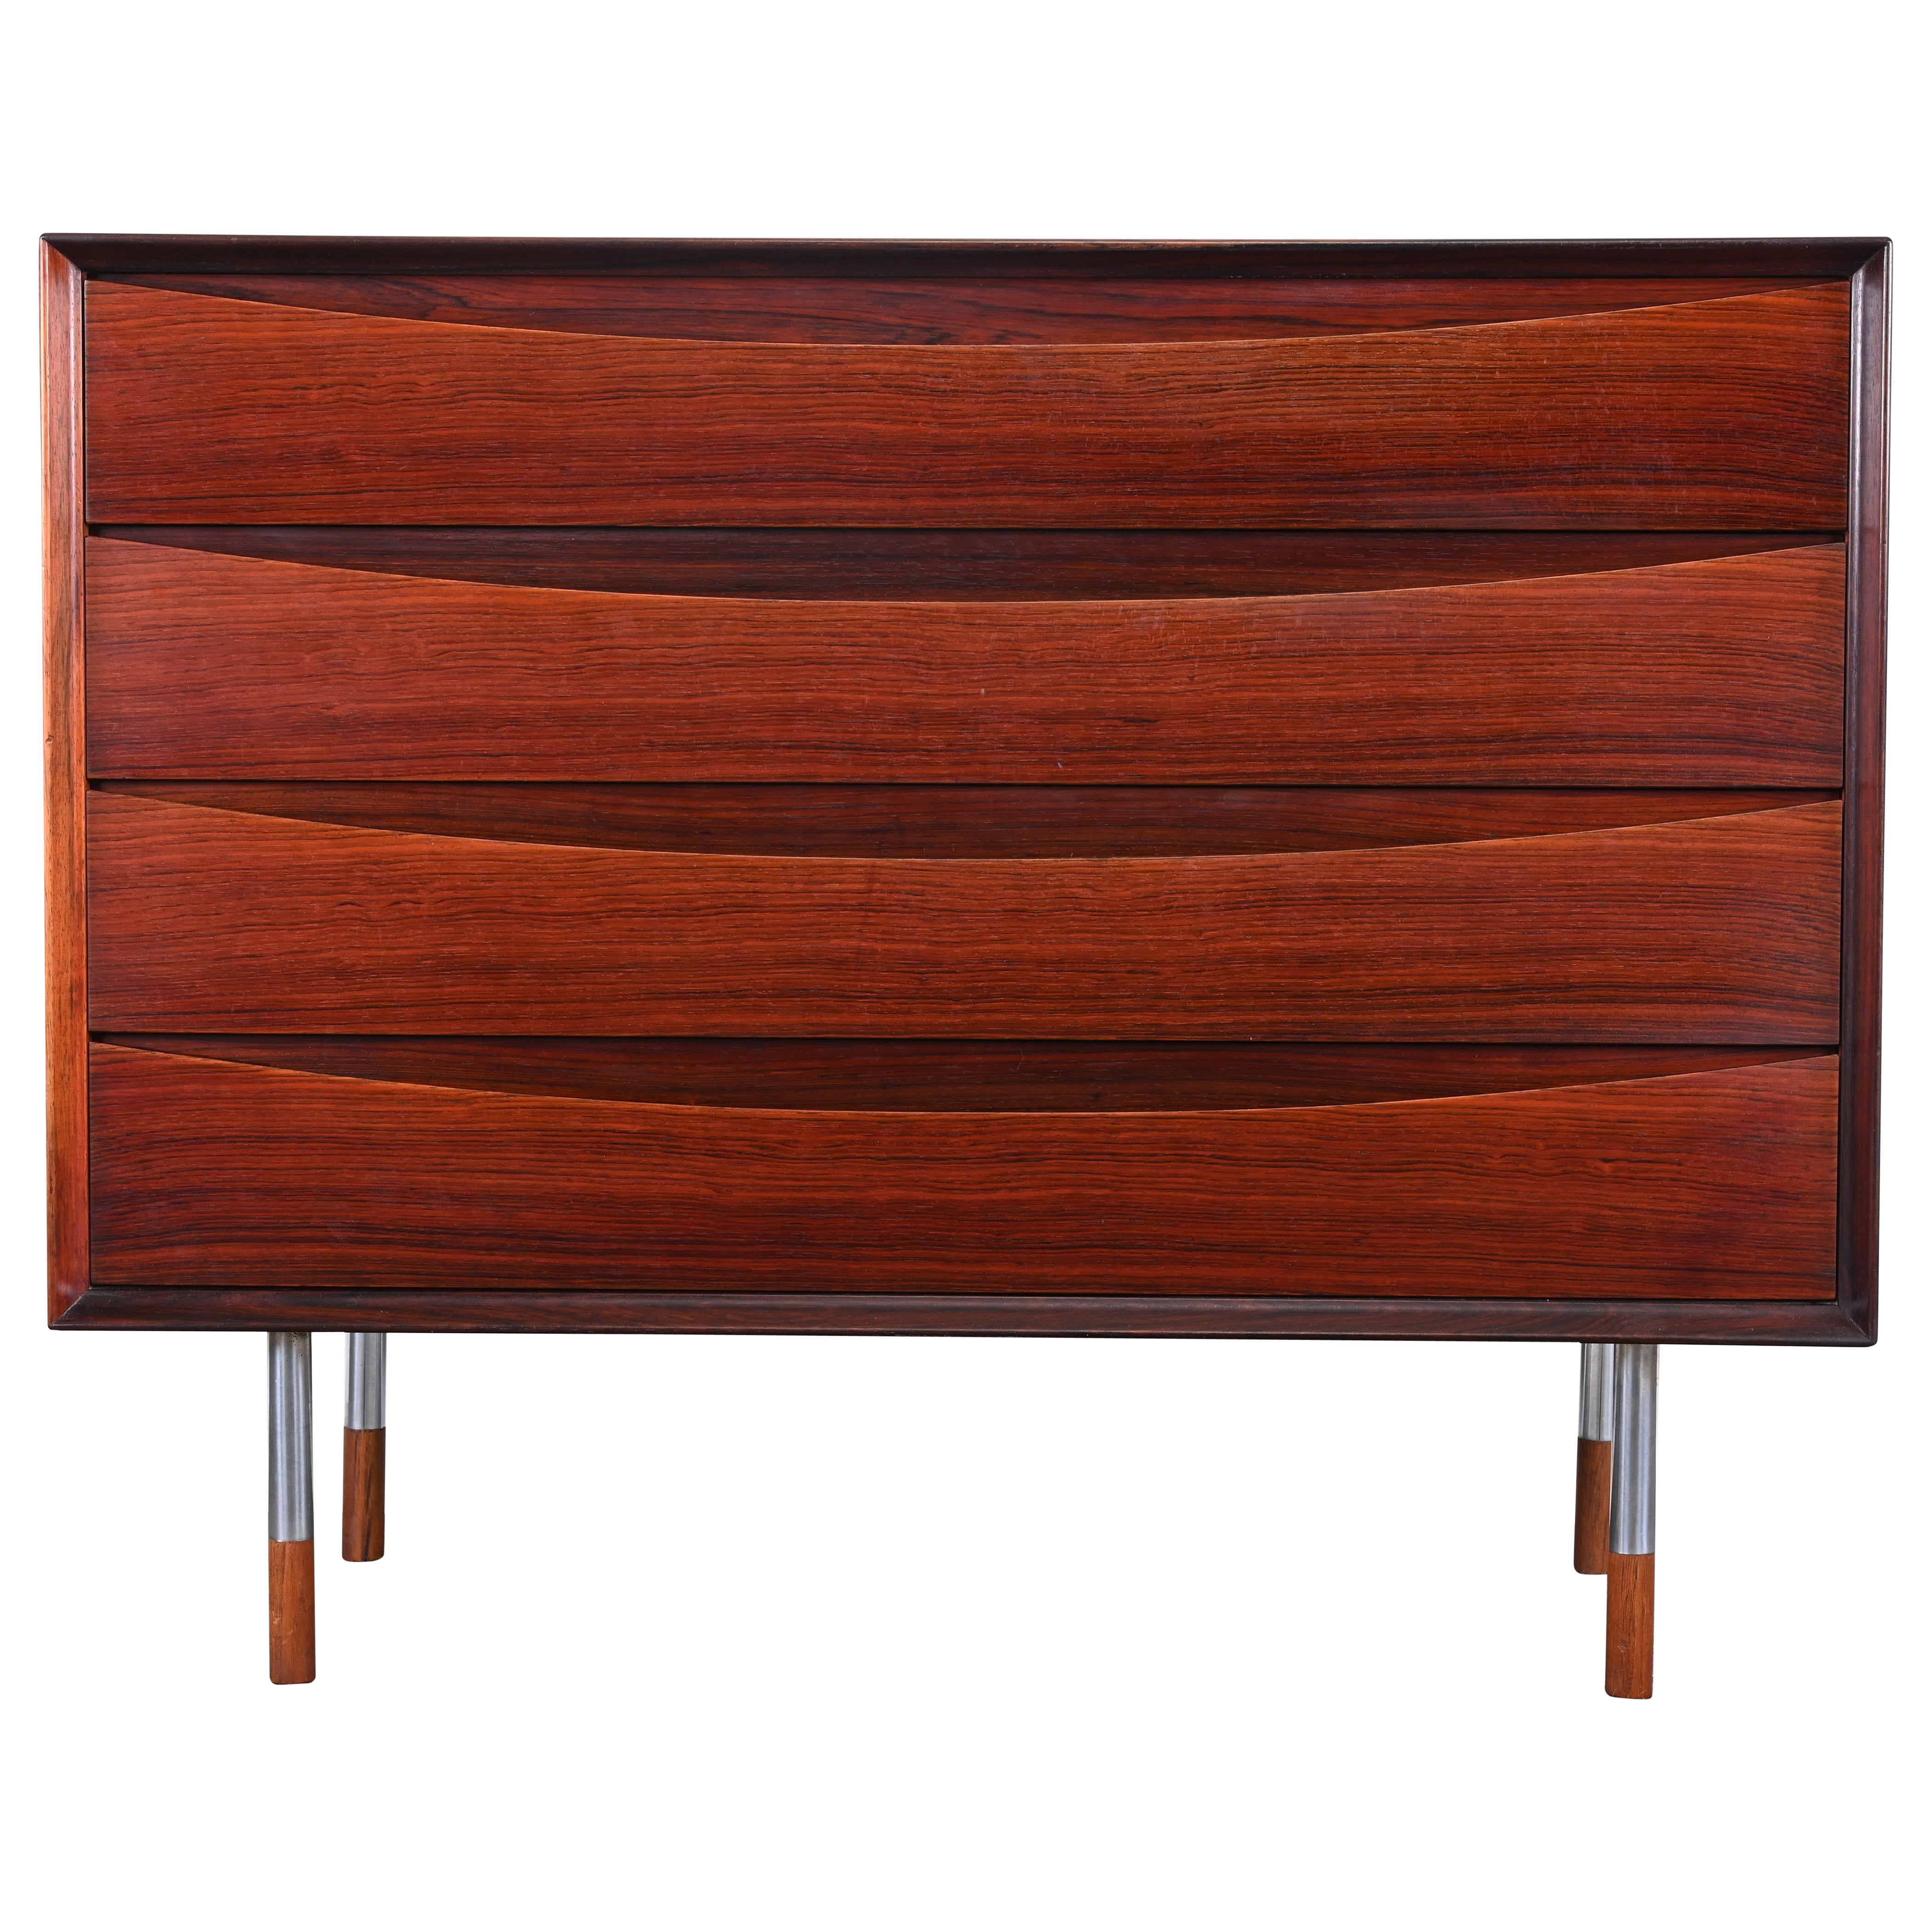 Rosewood Chest of Drawers by Arne Vodder for Sibast, 1960s